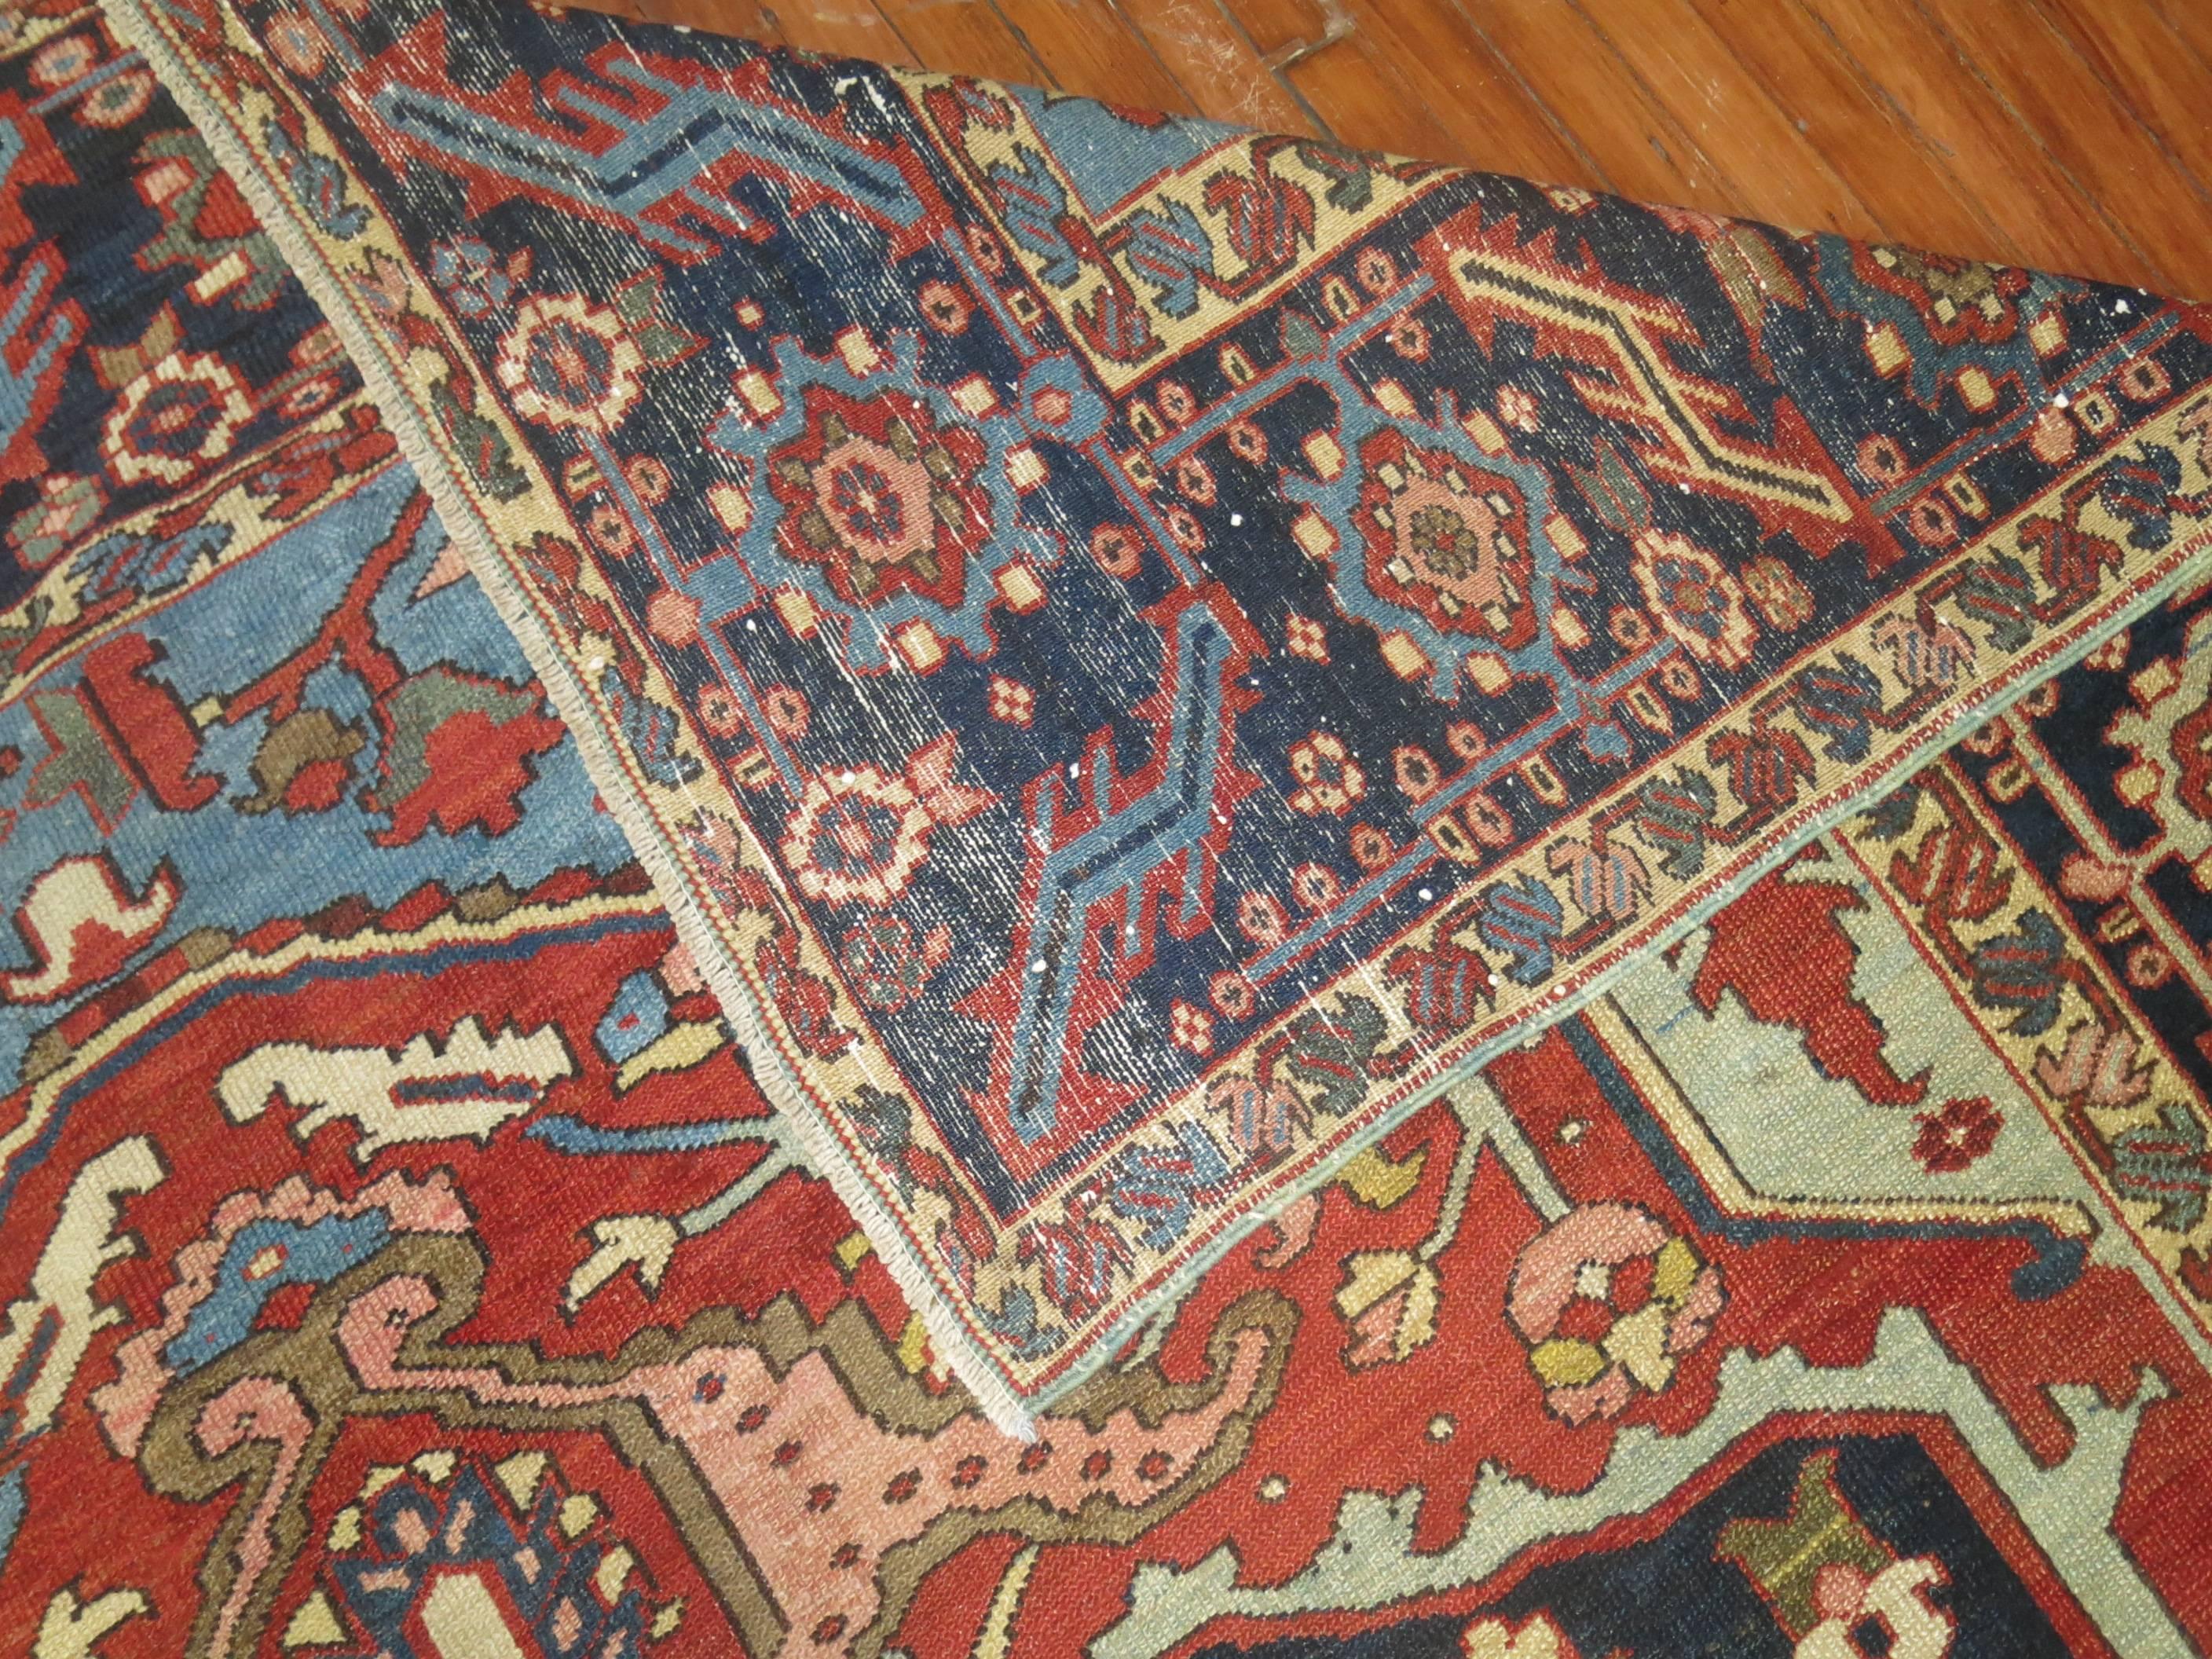 A room size masculine antique Persian Heriz rug from the 1st quarter of the 20th century

Measures: 8'8'' x 12'2''

Originating in Northwest Persia and the Iranian province of East Azerbaijan, Heriz Oriental rugs from Persia include regional